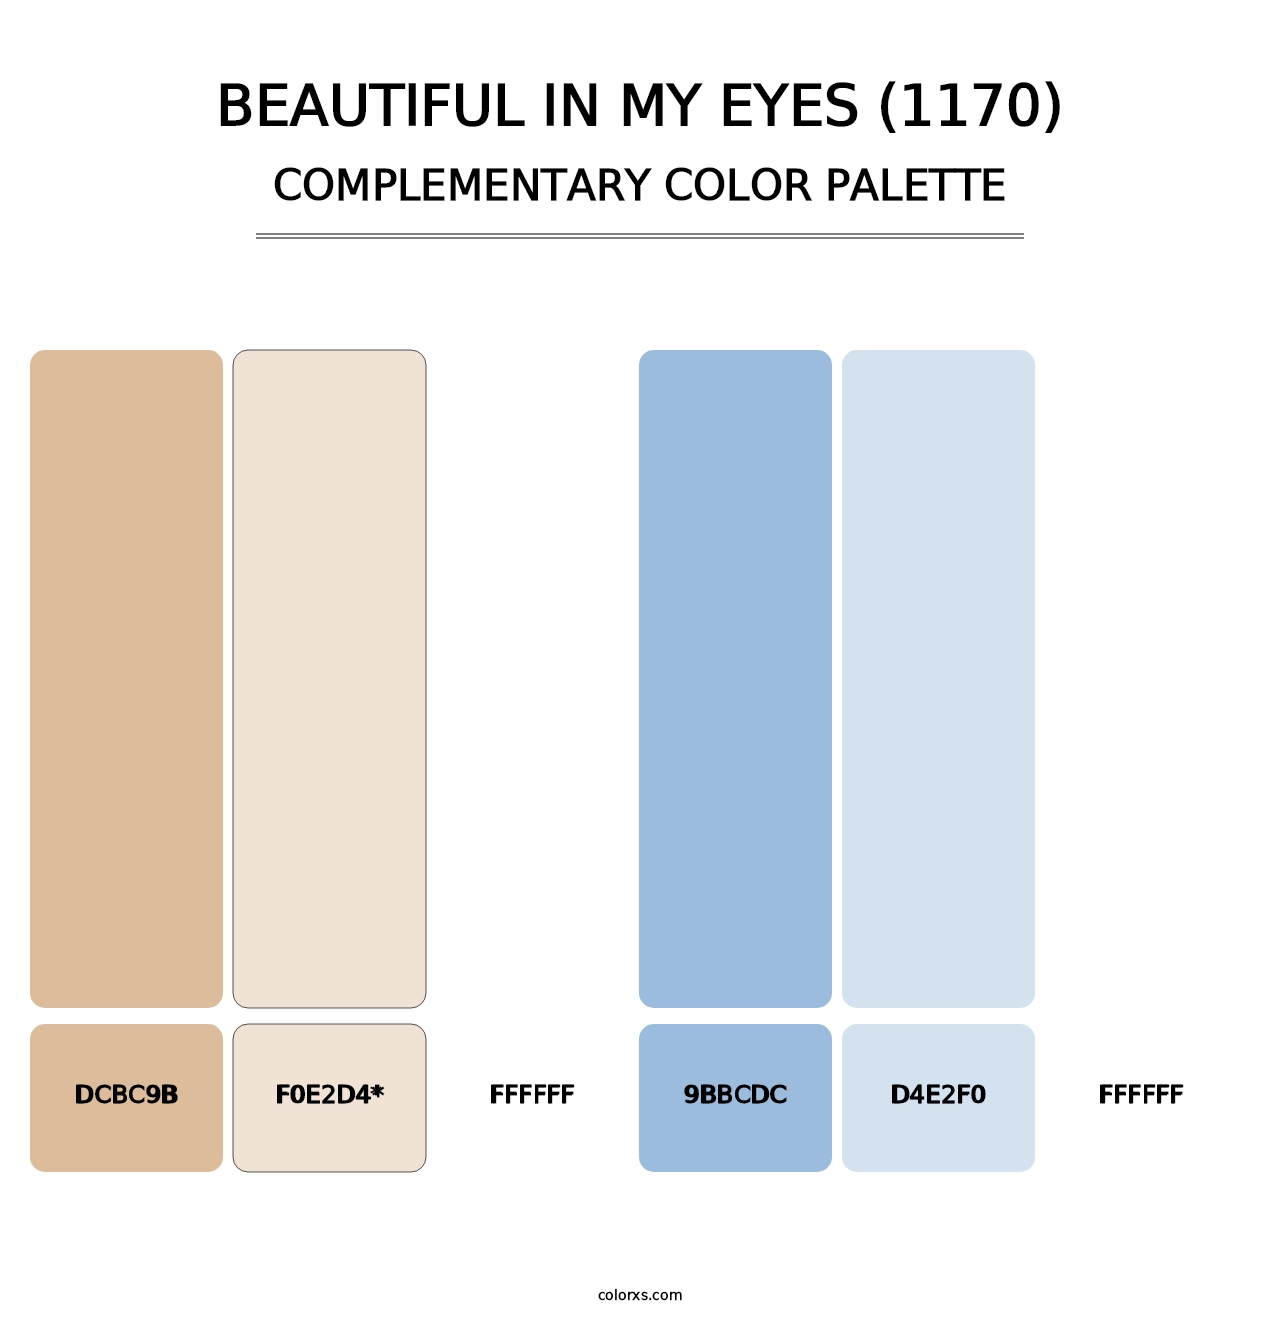 Beautiful in My Eyes (1170) - Complementary Color Palette